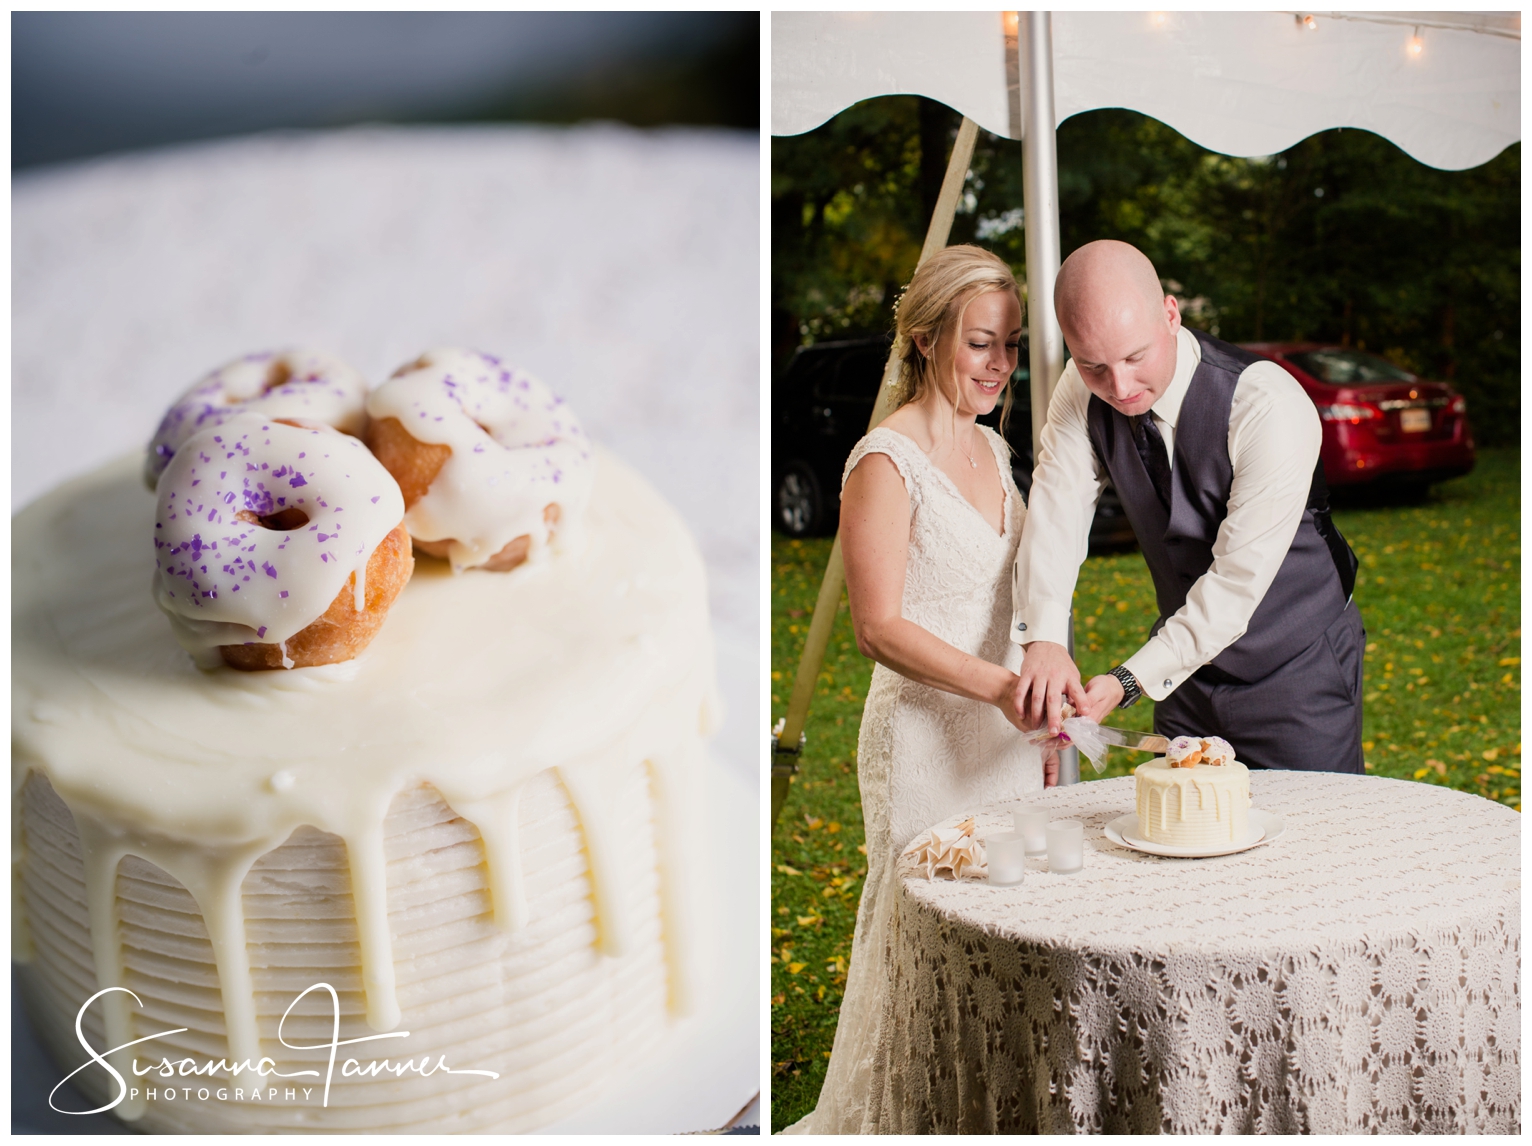 Indianapolis Outdoor Wedding, close up of wedding cake and bride and groom cutting cake